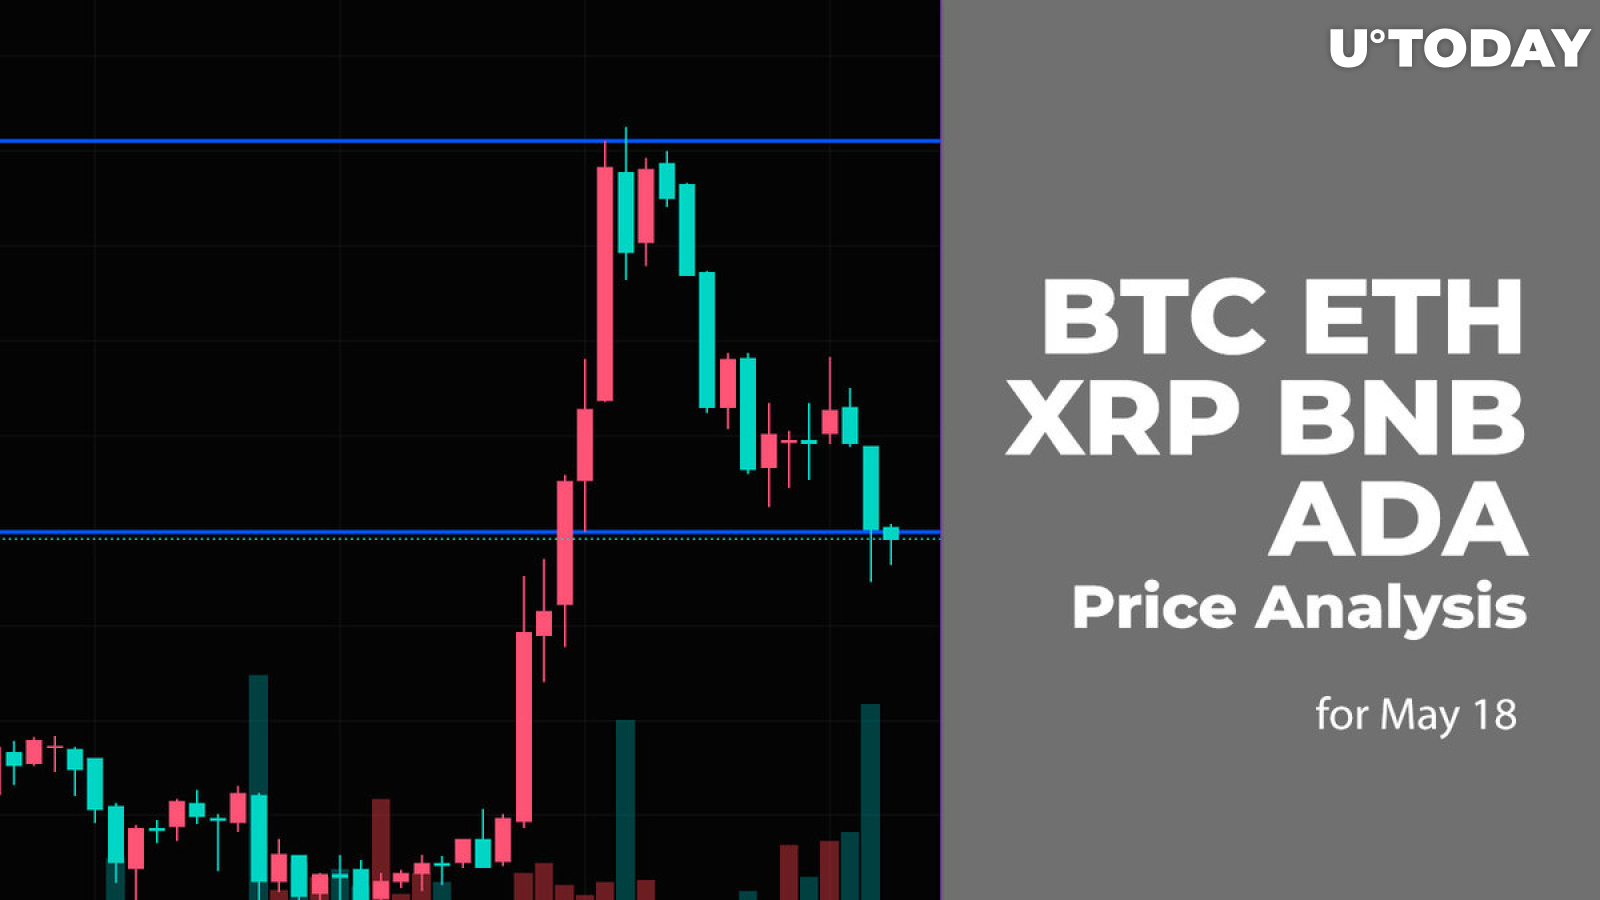 BTC, ETH, XRP, BNB and ADA Price Analysis for May 18